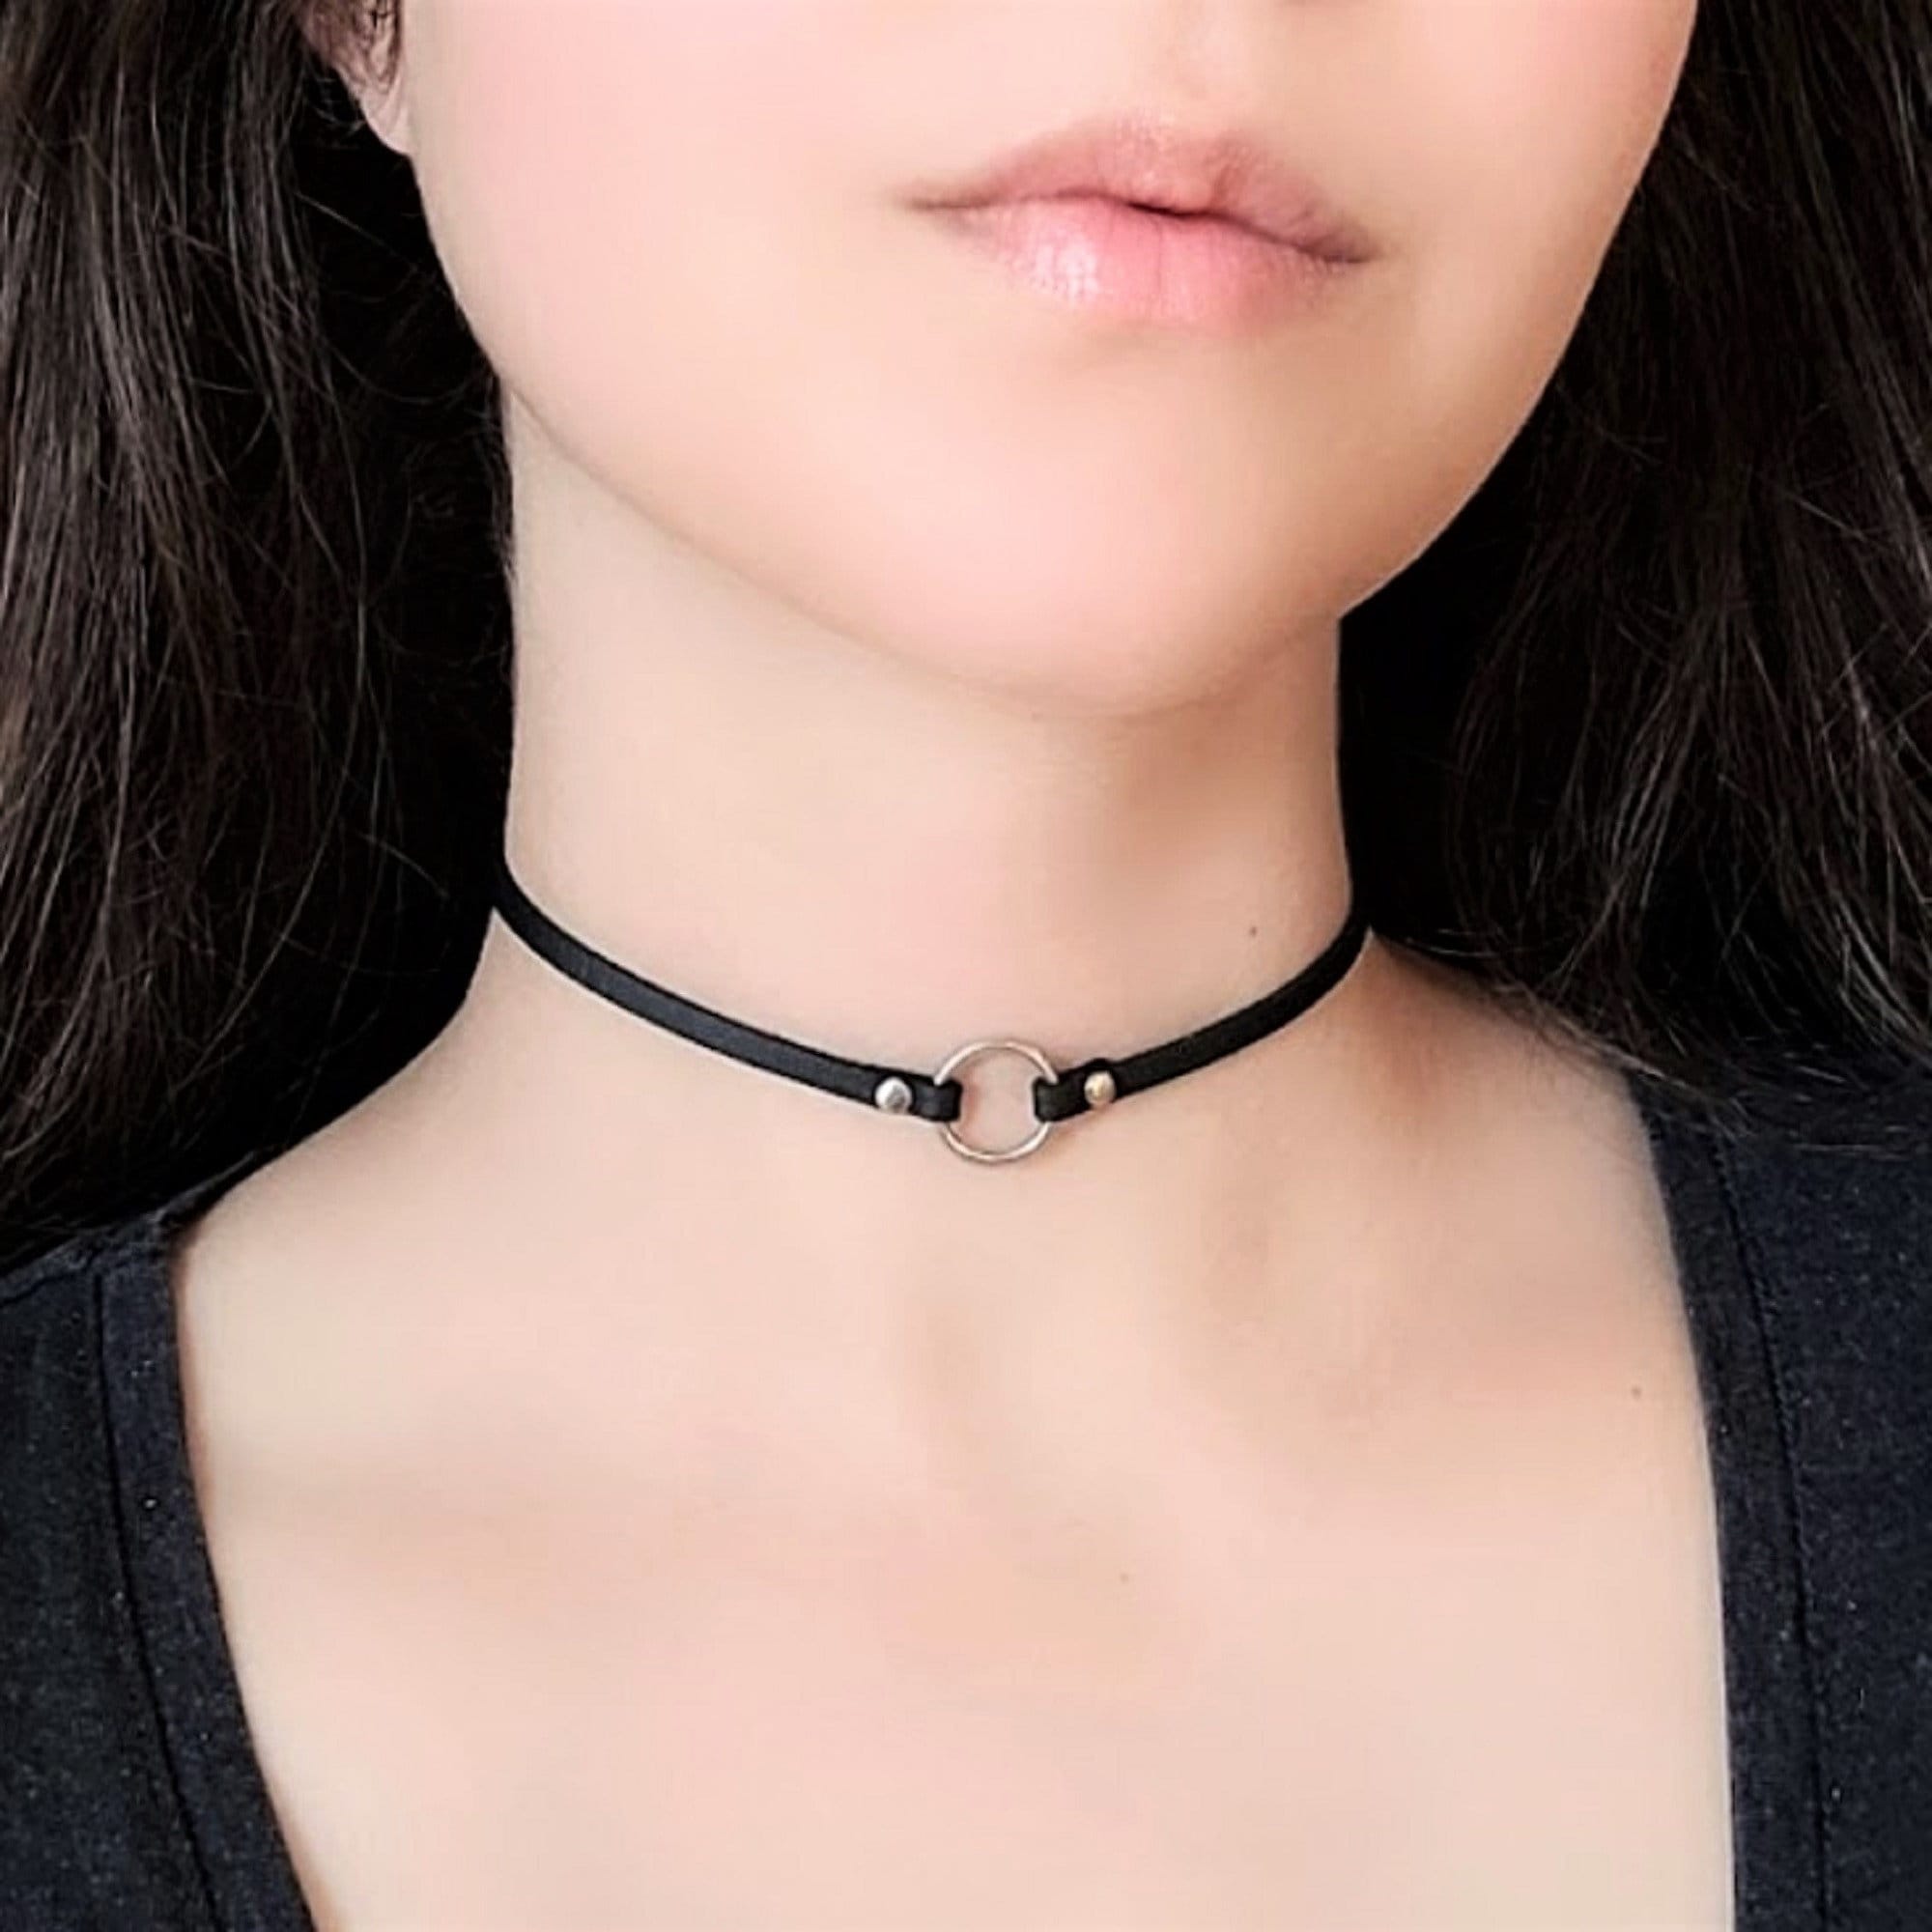 Mens Black Leather Choker Necklace Stainless Steel Closure Choker